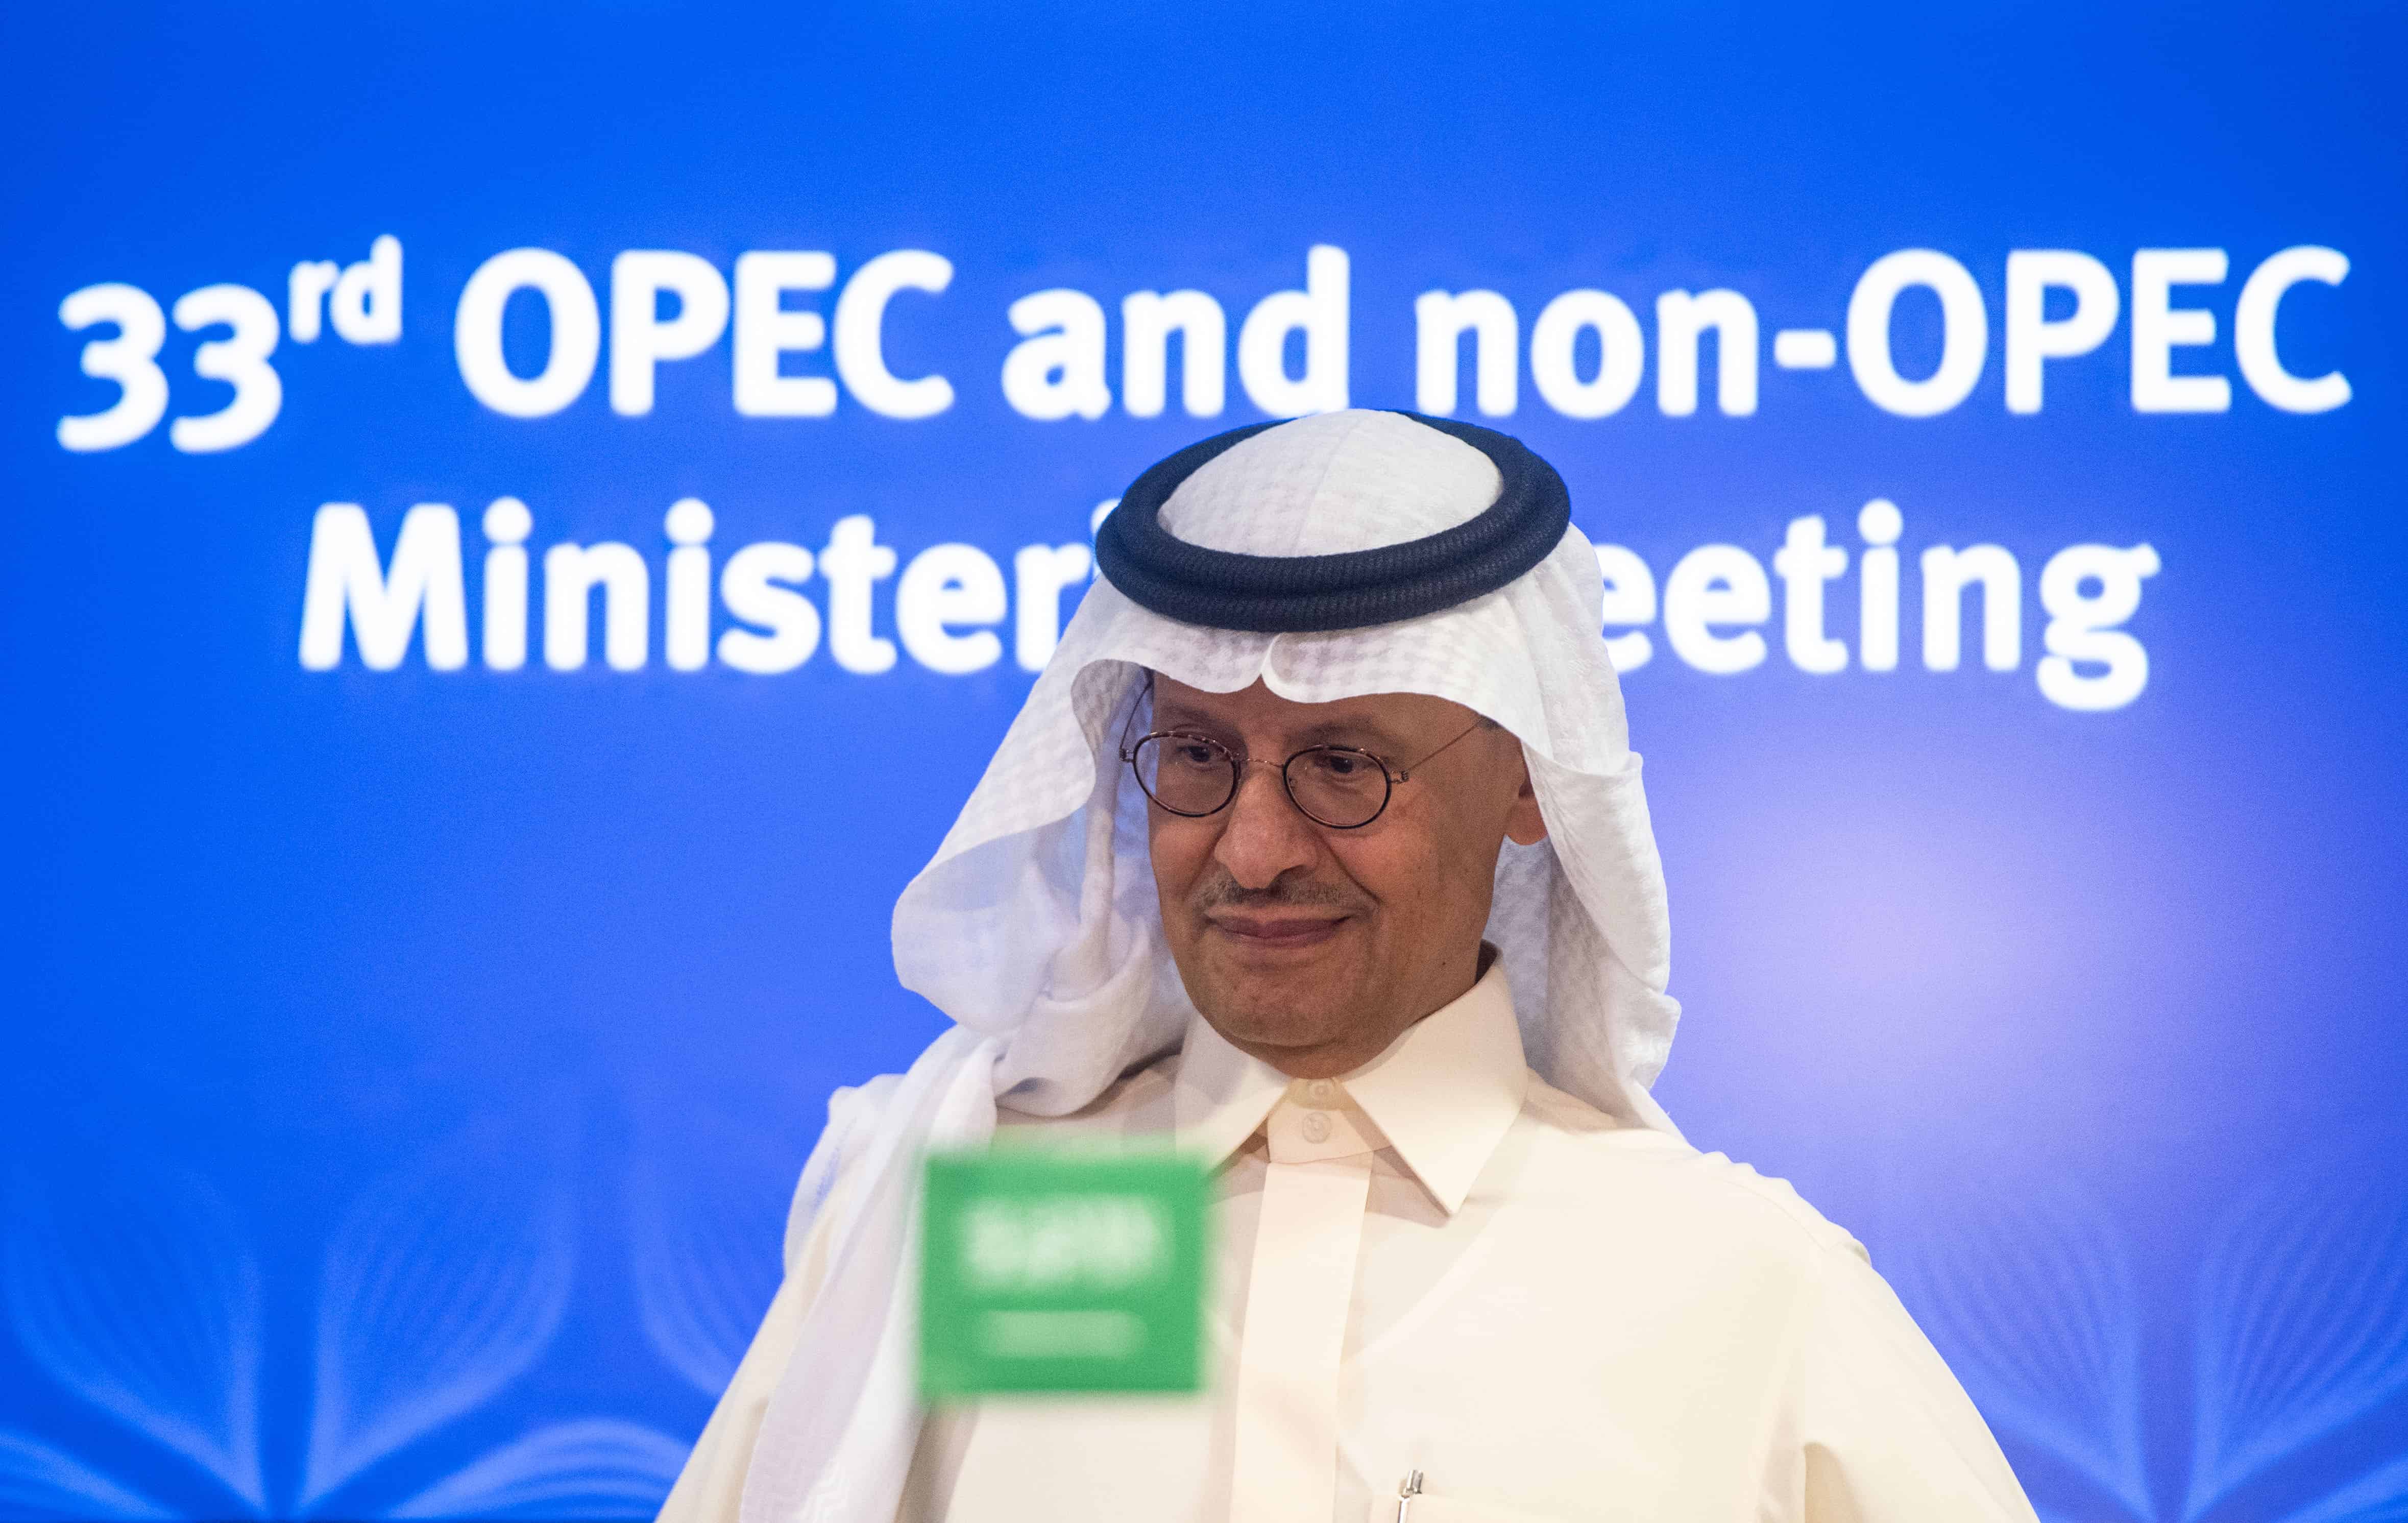 Saudi Arabia's Minister of Energy Abdulaziz bin Salman at a press conference after a recent OPEC+ meeting in Vienna, Austria on October 5, 2022. (AFP)